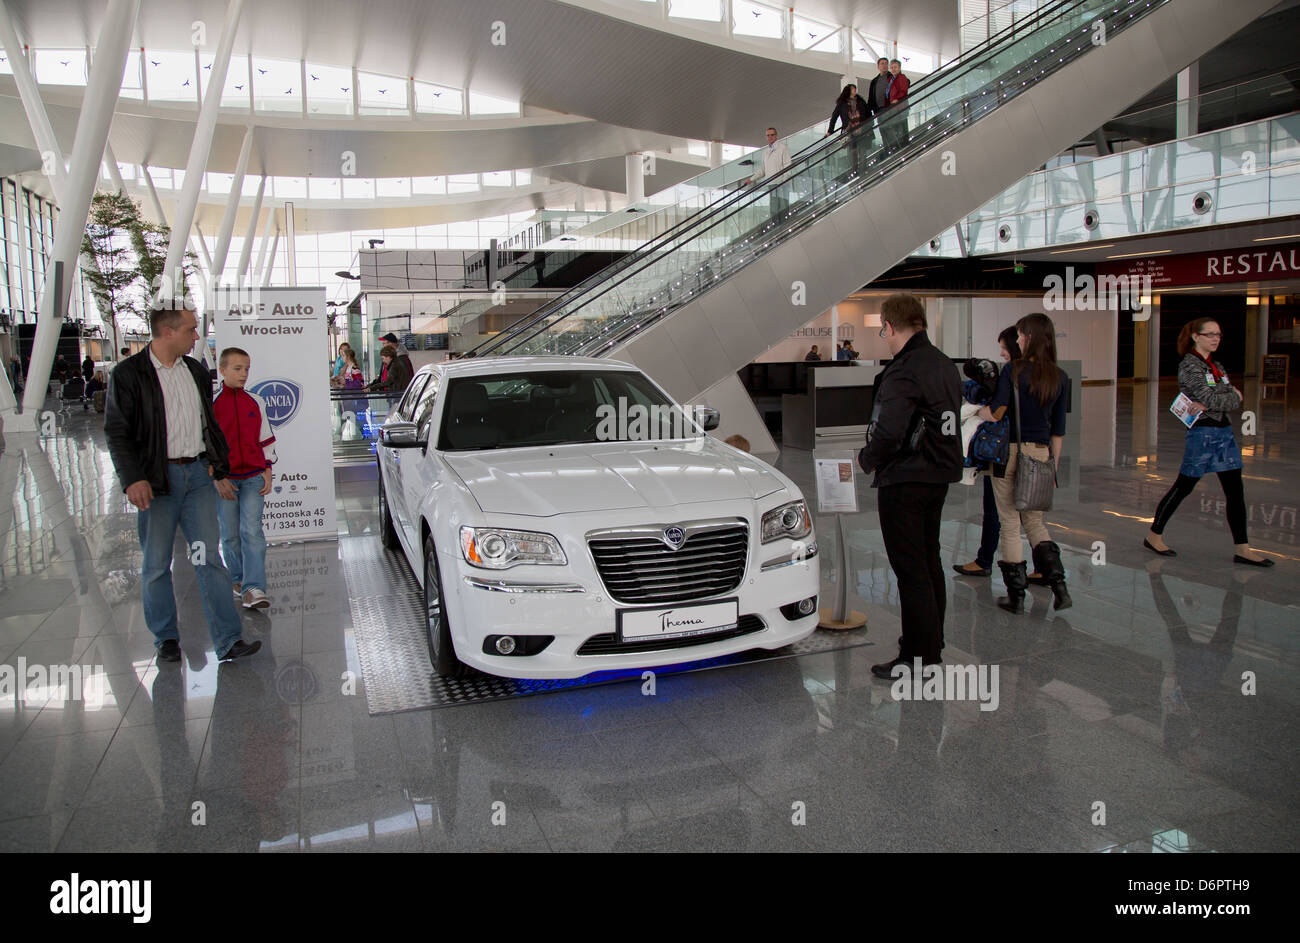 Wroclaw, Poland, Lancia Thema 3.6 V6 Pentastar Platinum issued in the new Copernicus Airport Wroclaw Stock Photo